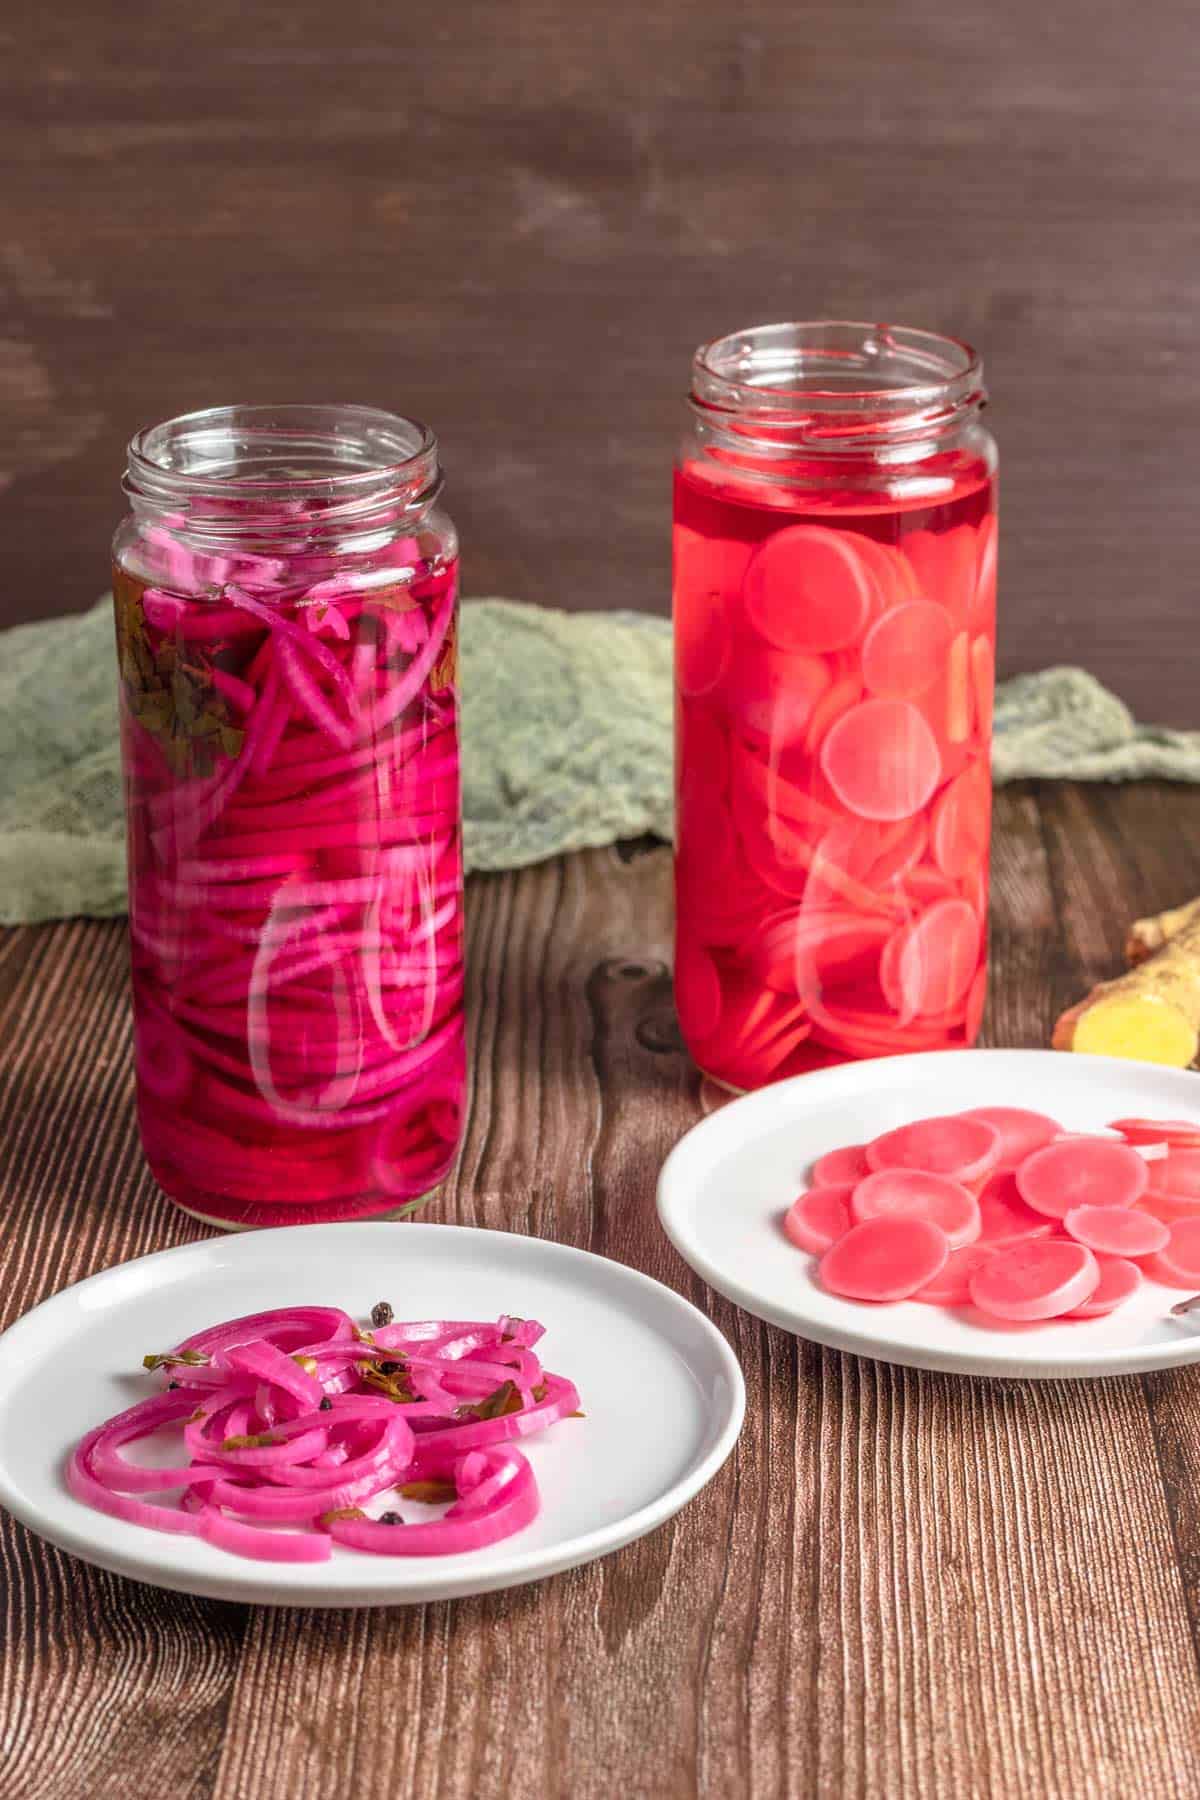 Pickled radish and onions